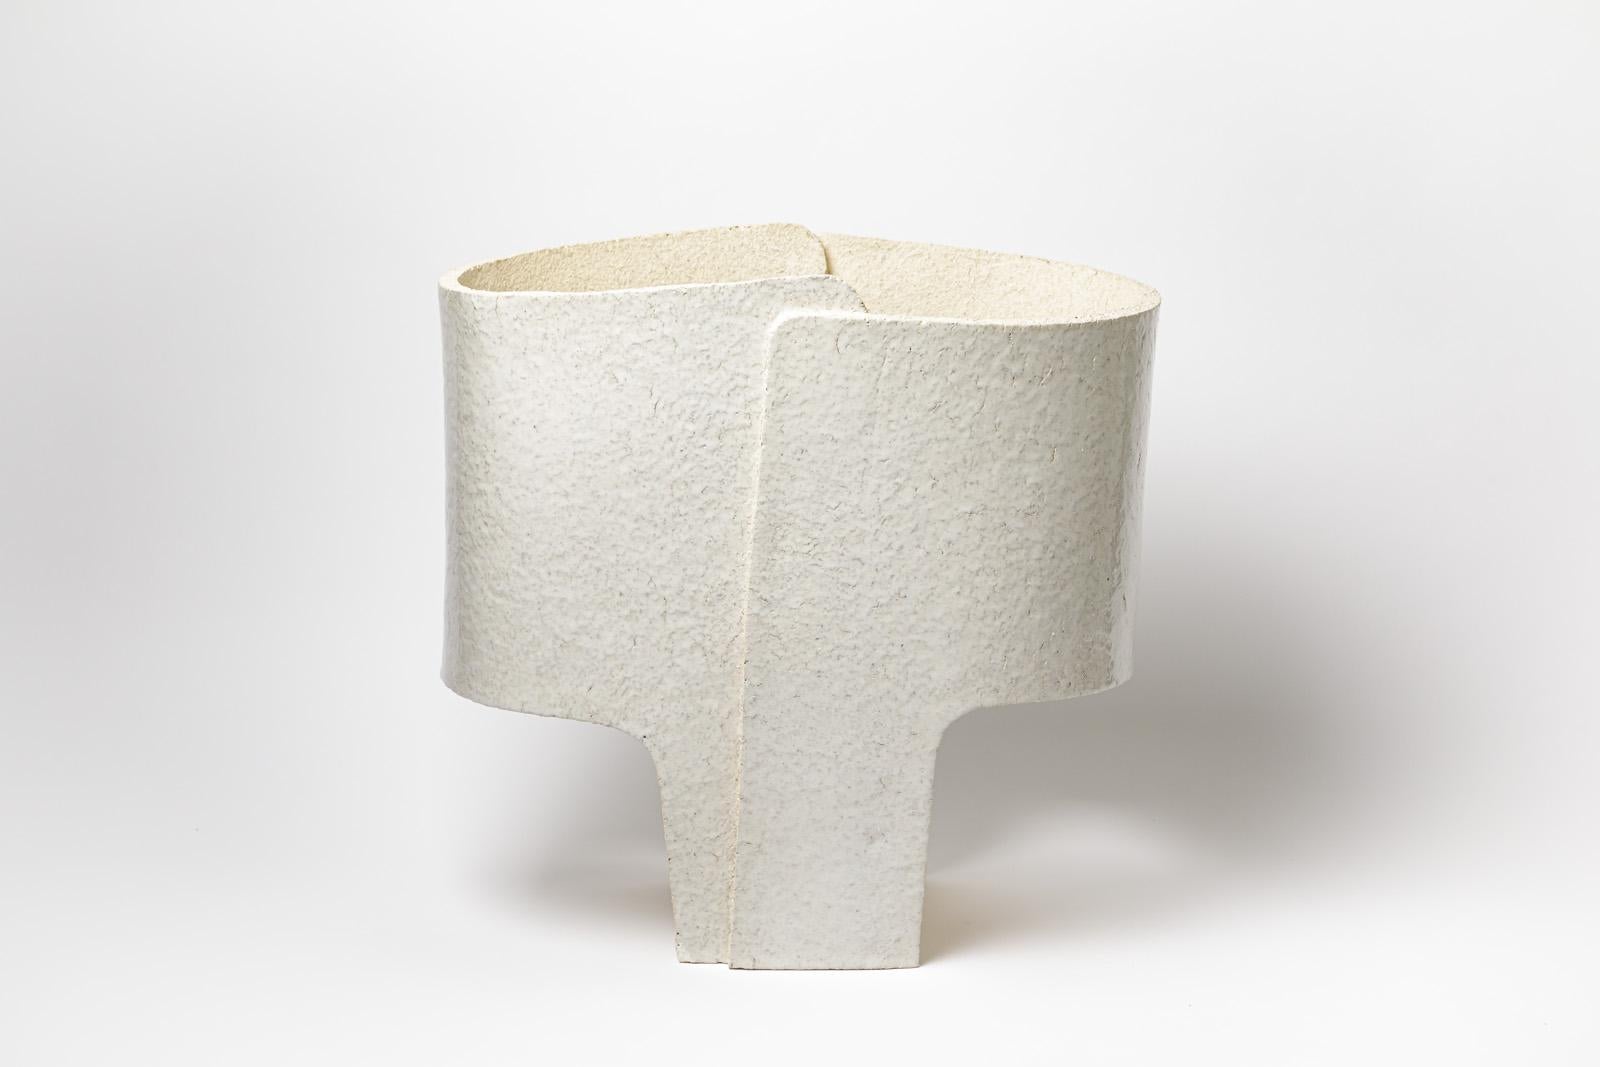 « Nocta_03 » table lamp in white glazed stoneware by Denis Castaing.
Sold with a new European electrical system.
2020.